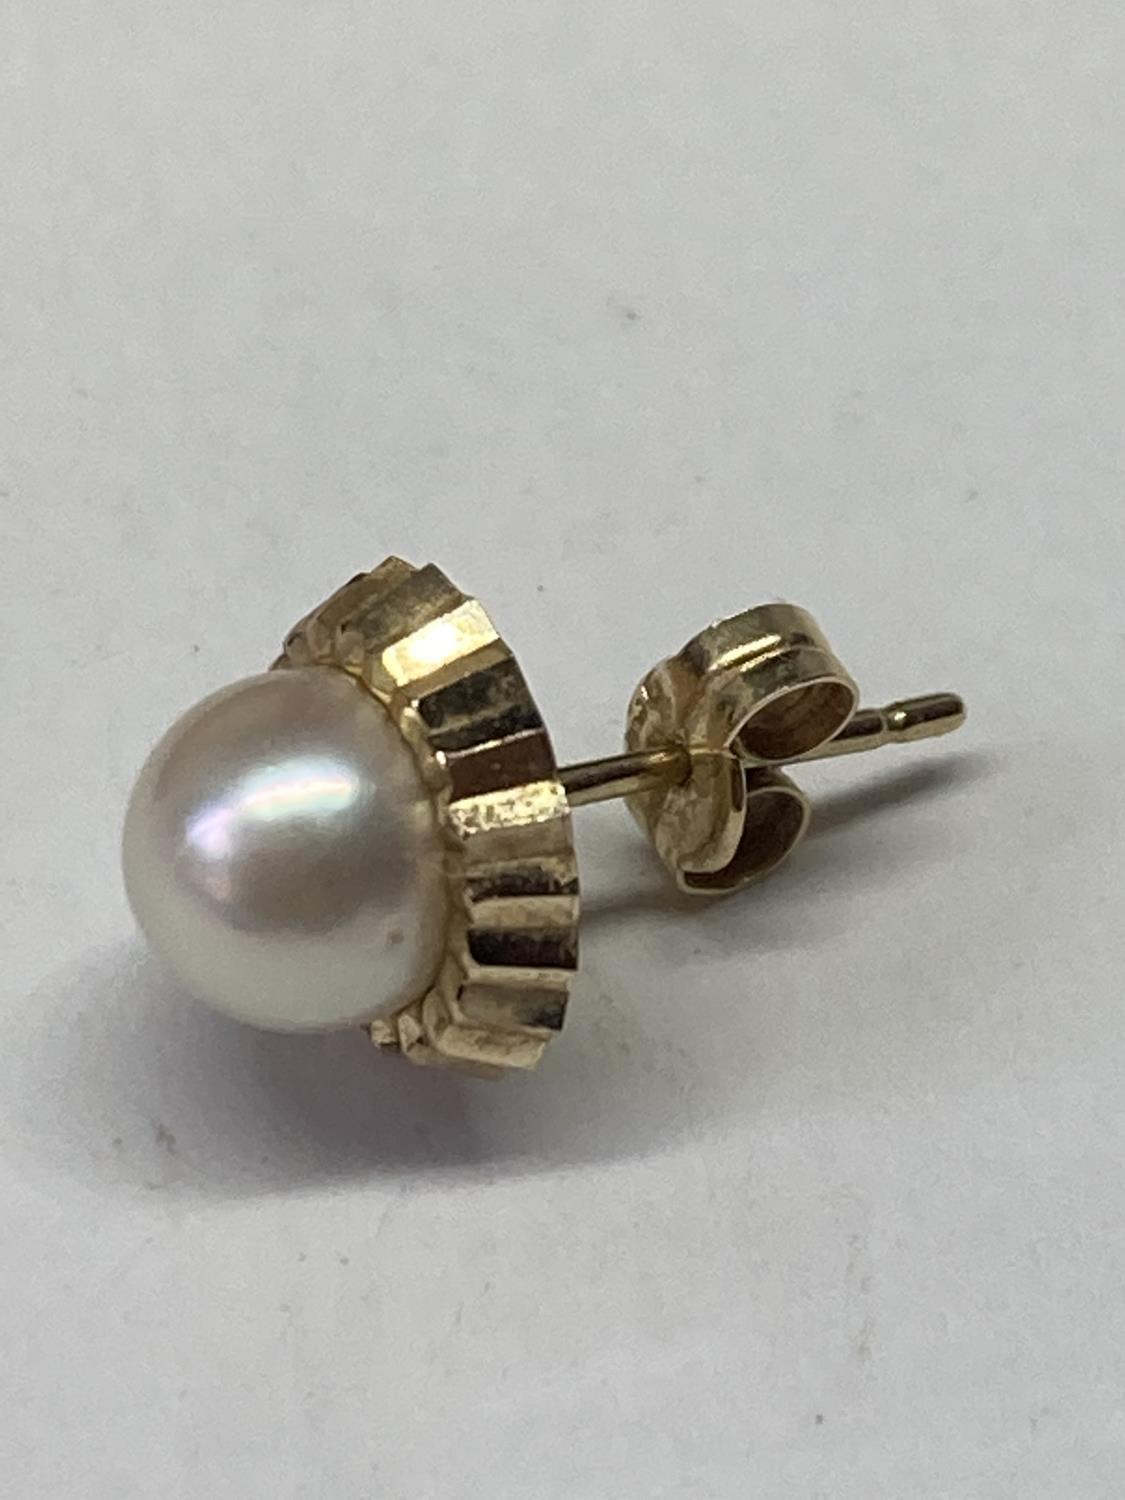 A PAIR OF 9 CARAT GOLD AND PEARL EARRINGS IN A PRESENTATION BOX - Image 4 of 8